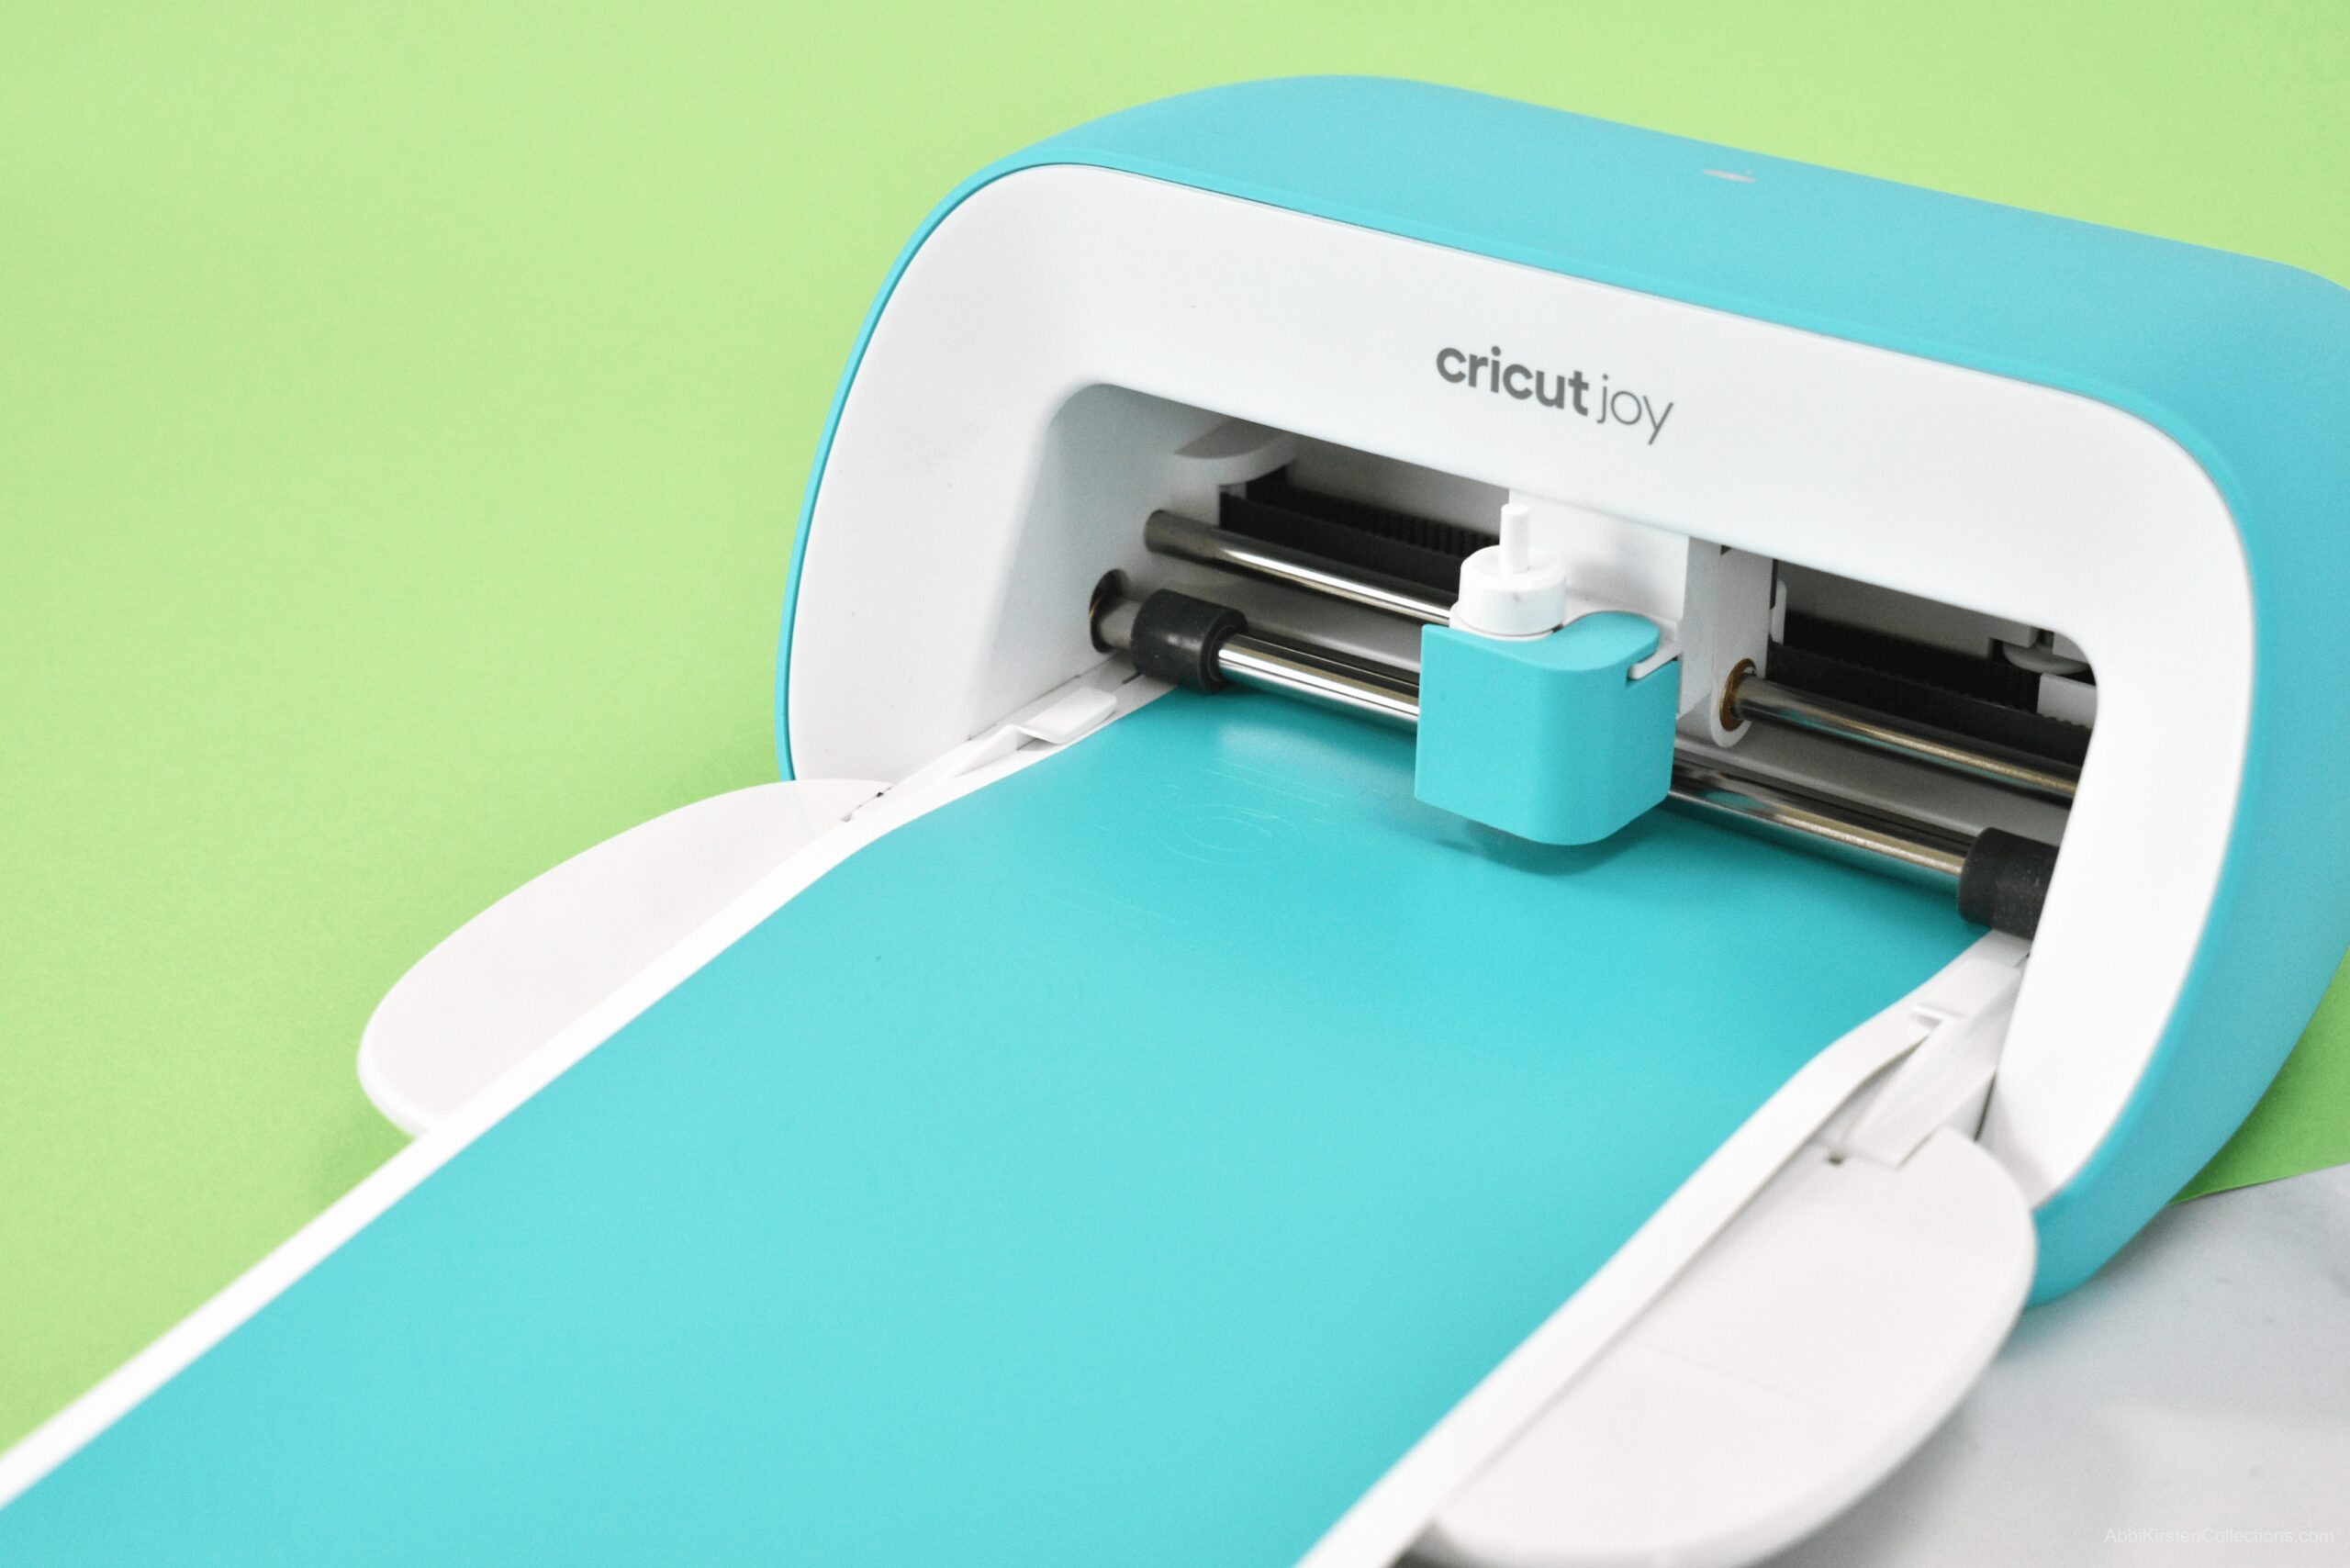 Cricut Joy Accessories and Materials You Need to Get Started